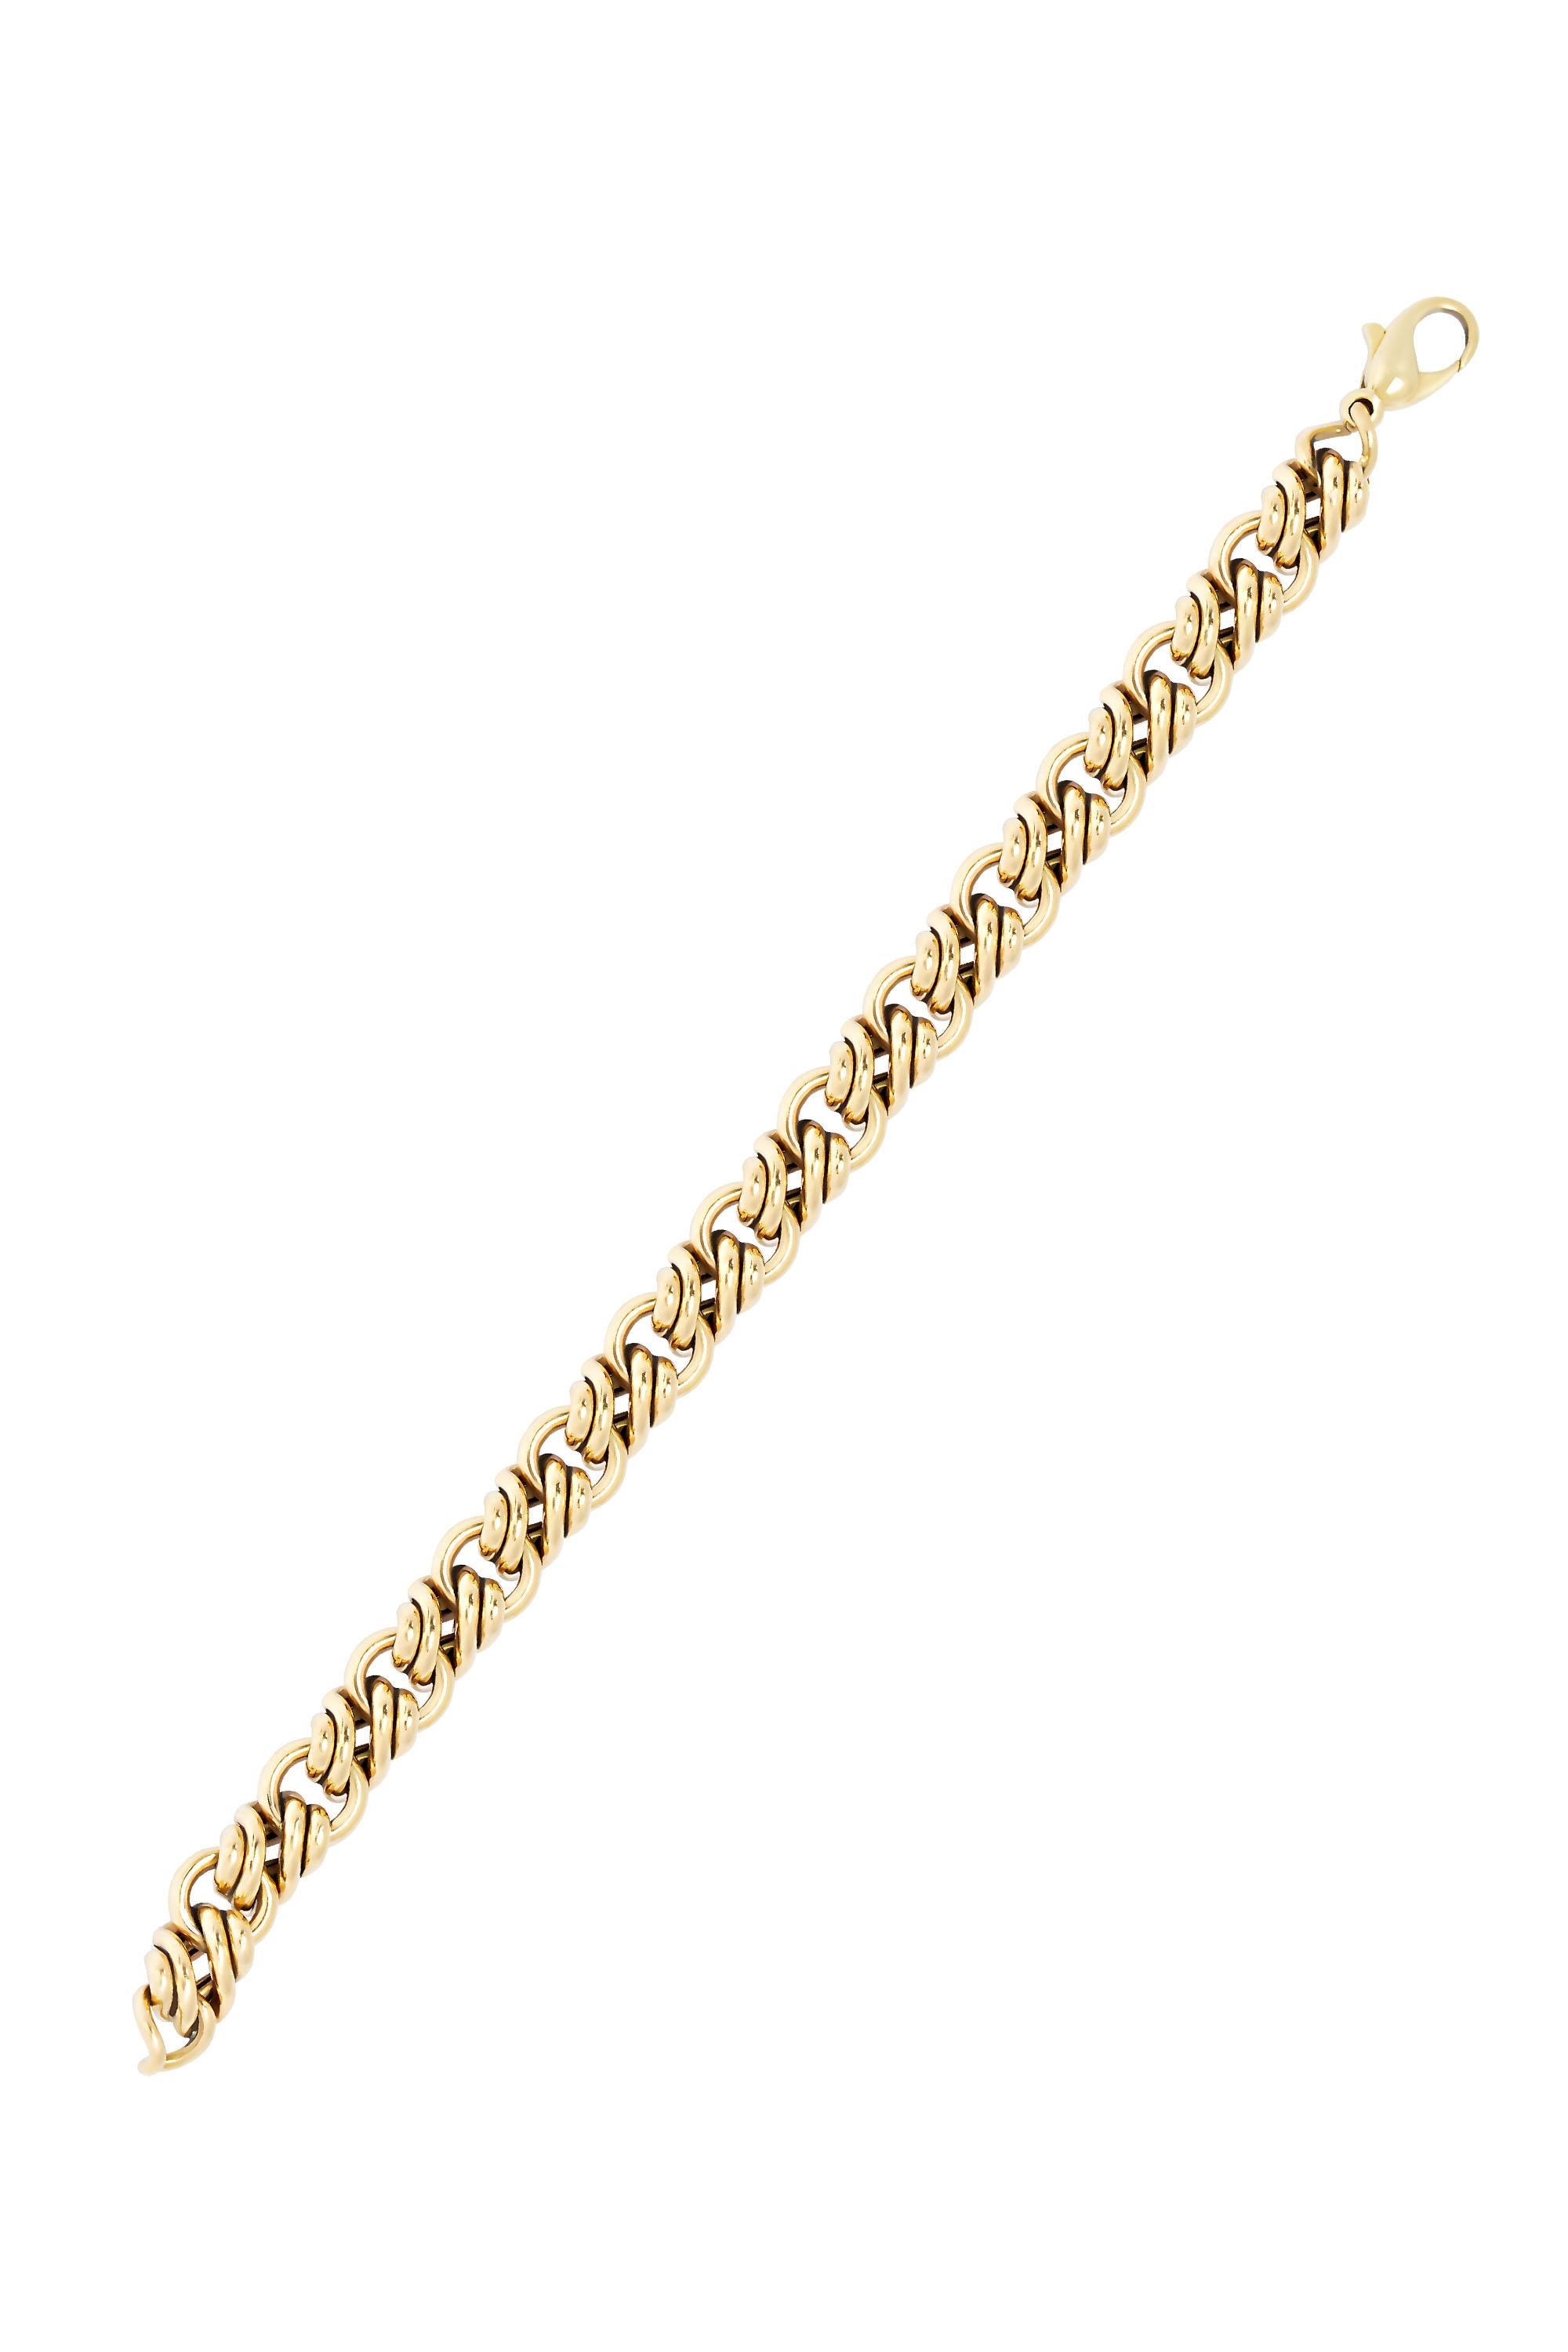 This stylish and eminently wearable vintage French knot bracelet by Tiffany & Co. is a wonderful addition to any wardrobe. Beautifully crafted in 18 karat yellow gold and measuring 7 3/4 “ in length. The bracelet weighs 27.3 grams.